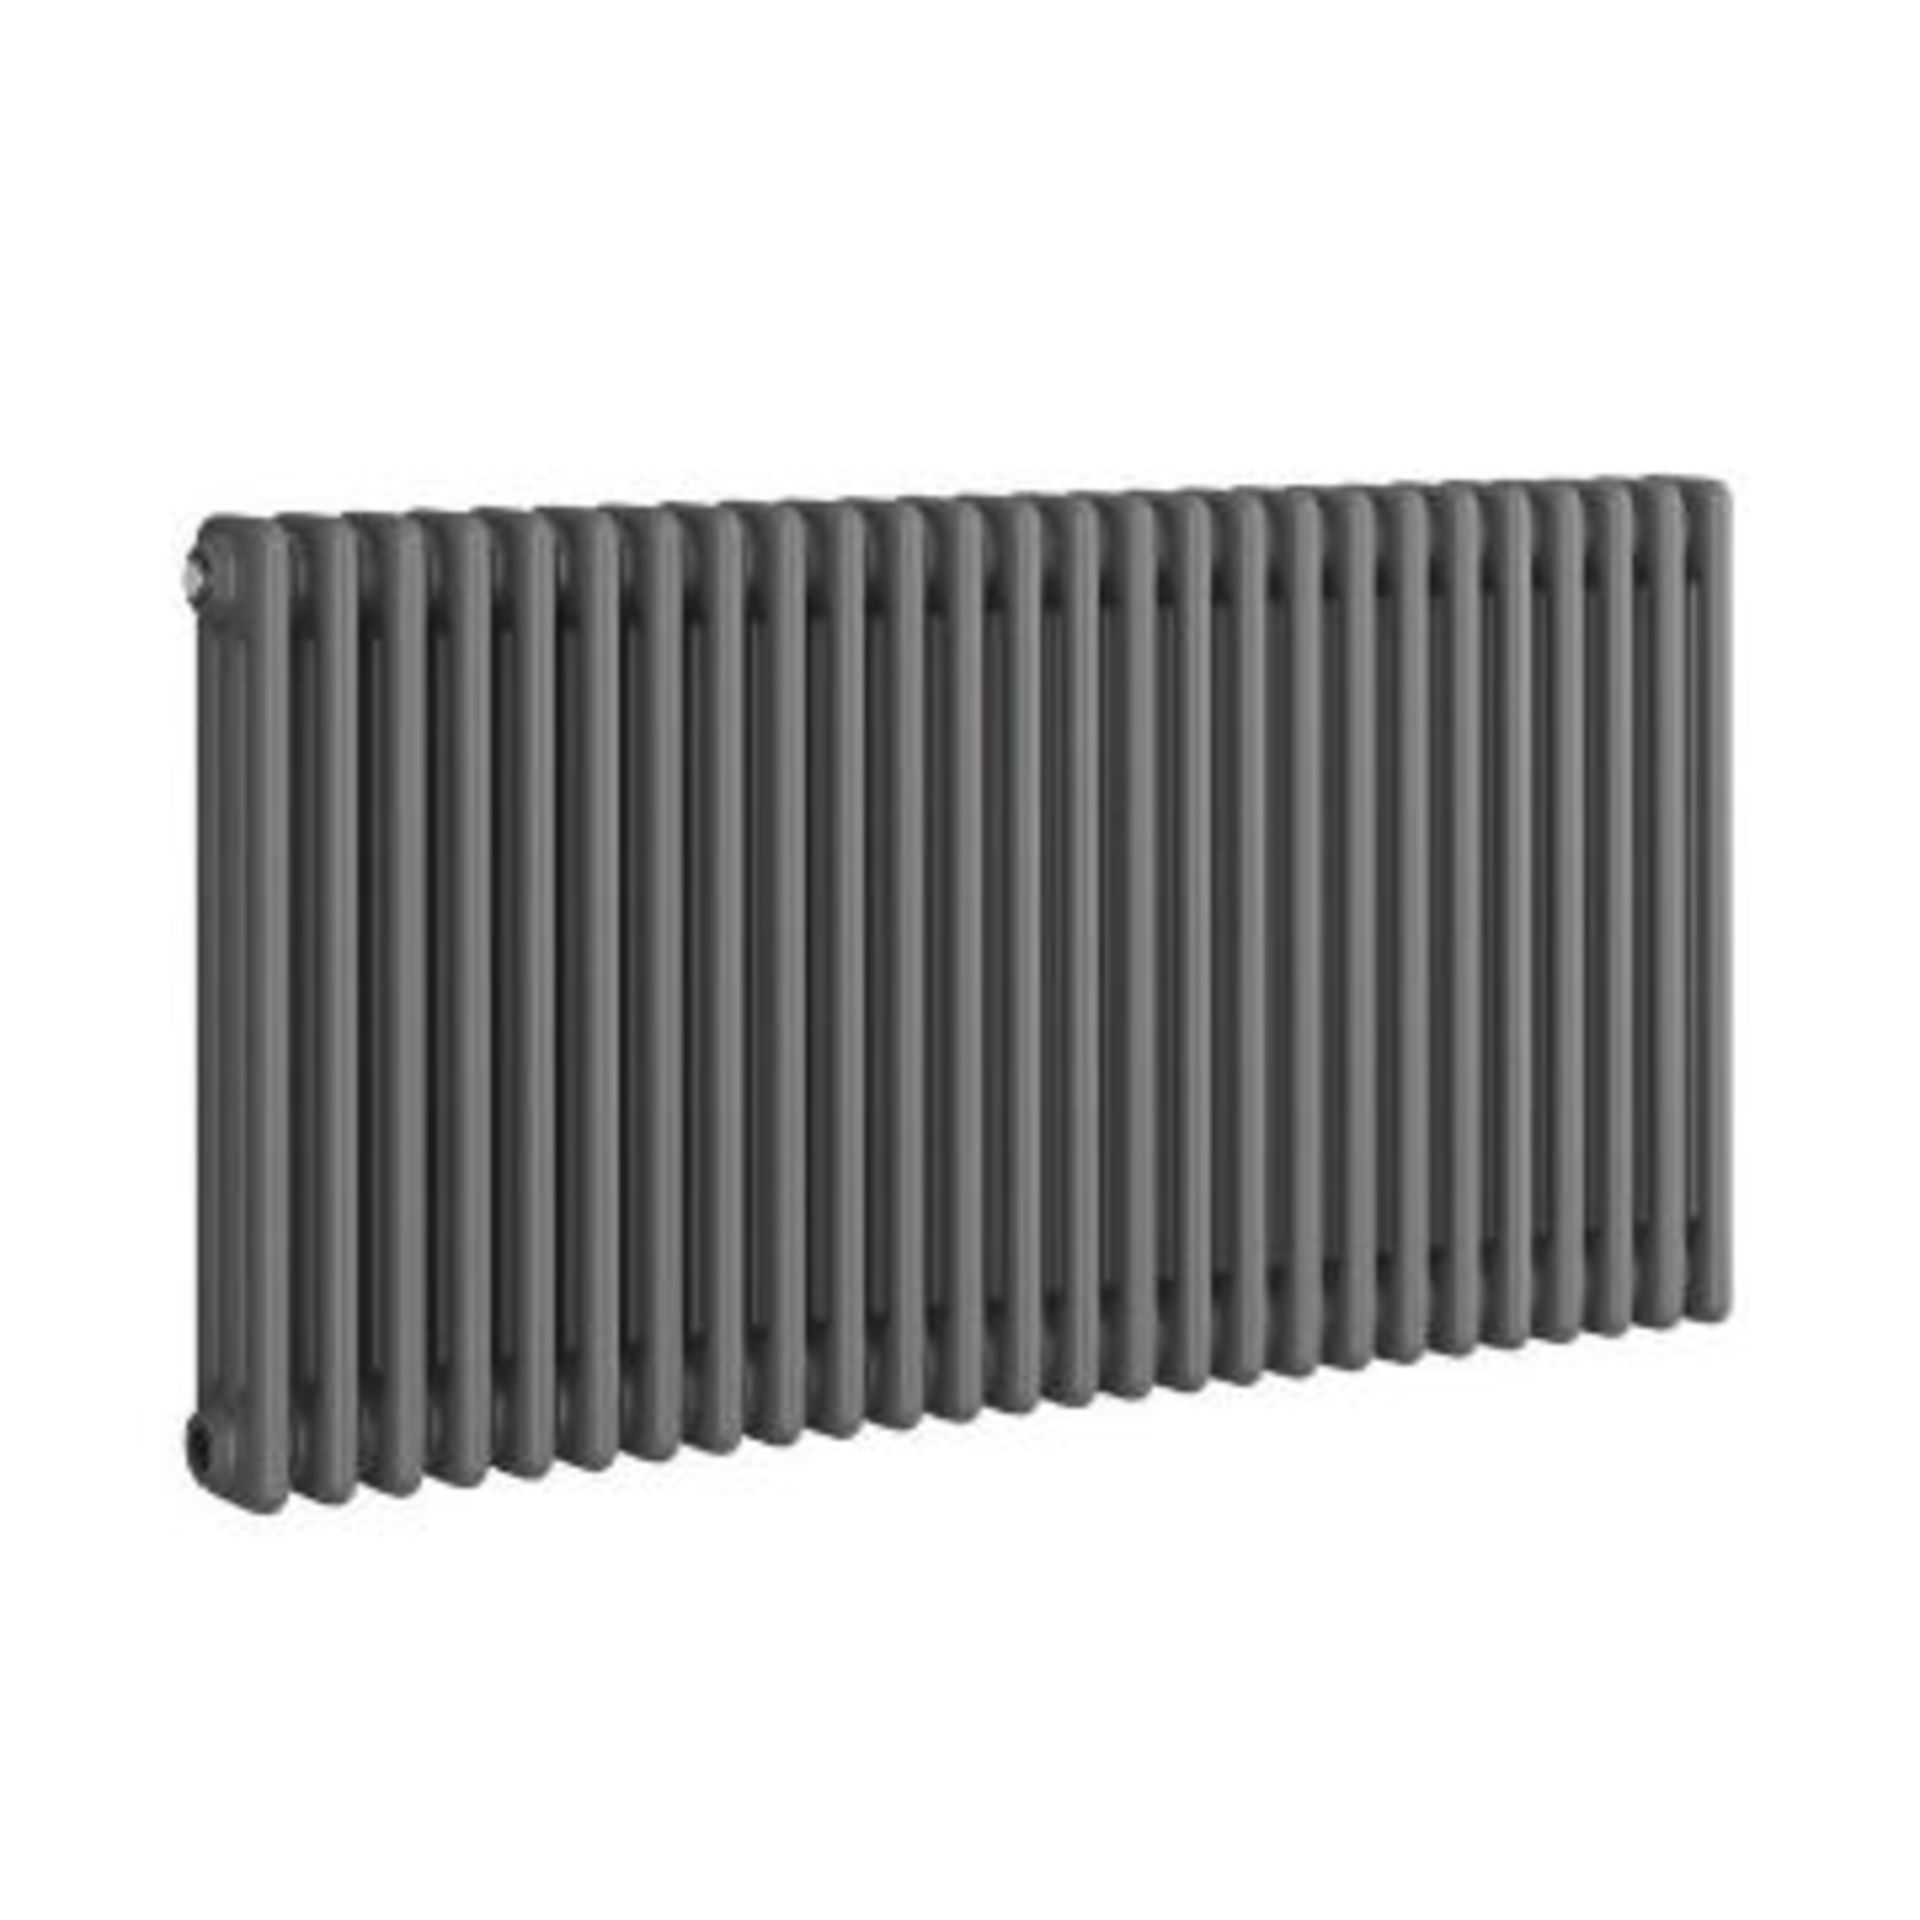 New & Boxed 600x828mm Anthracite Double Panel Horizontal Colosseum Traditional Radiator.RCA563. - Image 2 of 2